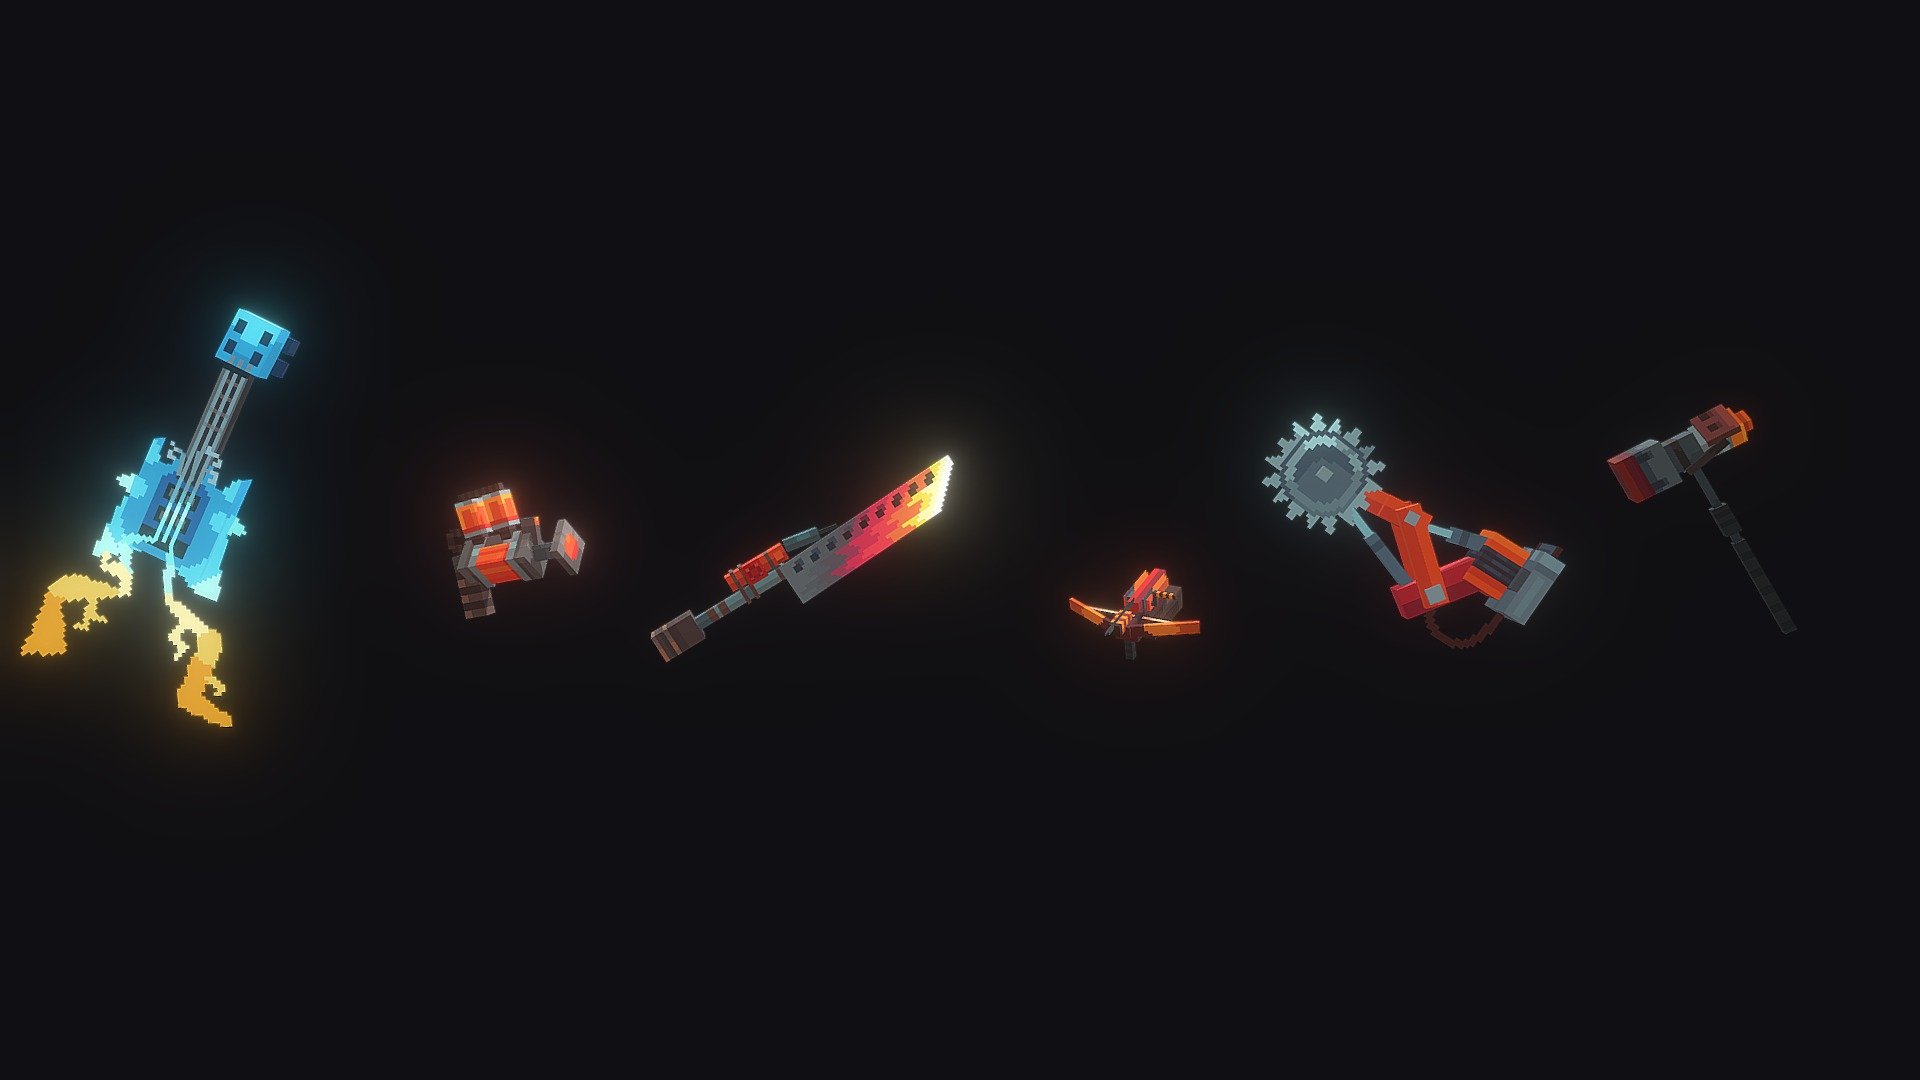 About the Project
Powerful Scrapyard weapons for taking down zombies!

Includes:
Buzzsaw Arm
Flame Cannon
Fume Blade
Impact Hammer
Lightning Guitar
Spike Launcher


Textured by Sam McLaughlin * https://twitter.com/Bhuna_Boy
Modelled by Will * https://twitter.com/somedaftmonkey
Concepts + Art Lead Marceau * https://twitter.com/MarceauNK
*Made for Cyclone Studios * https://twitter.com/Cyclone_LTD Zombie Arena https://www.youtube.com/watch?v=yaUQLE5PEmE
Made in Blockbench


Contact Me
Available for Marketplace or Minecraft work


Contact me on Discord: Sam McLaughlin#4095
Contact me by Email: samuelmclaughlin@talktalk.net
 - Zombie Arena Weapons - 3D model by Sam McLaughlin (@BhunaBoy) 3d model